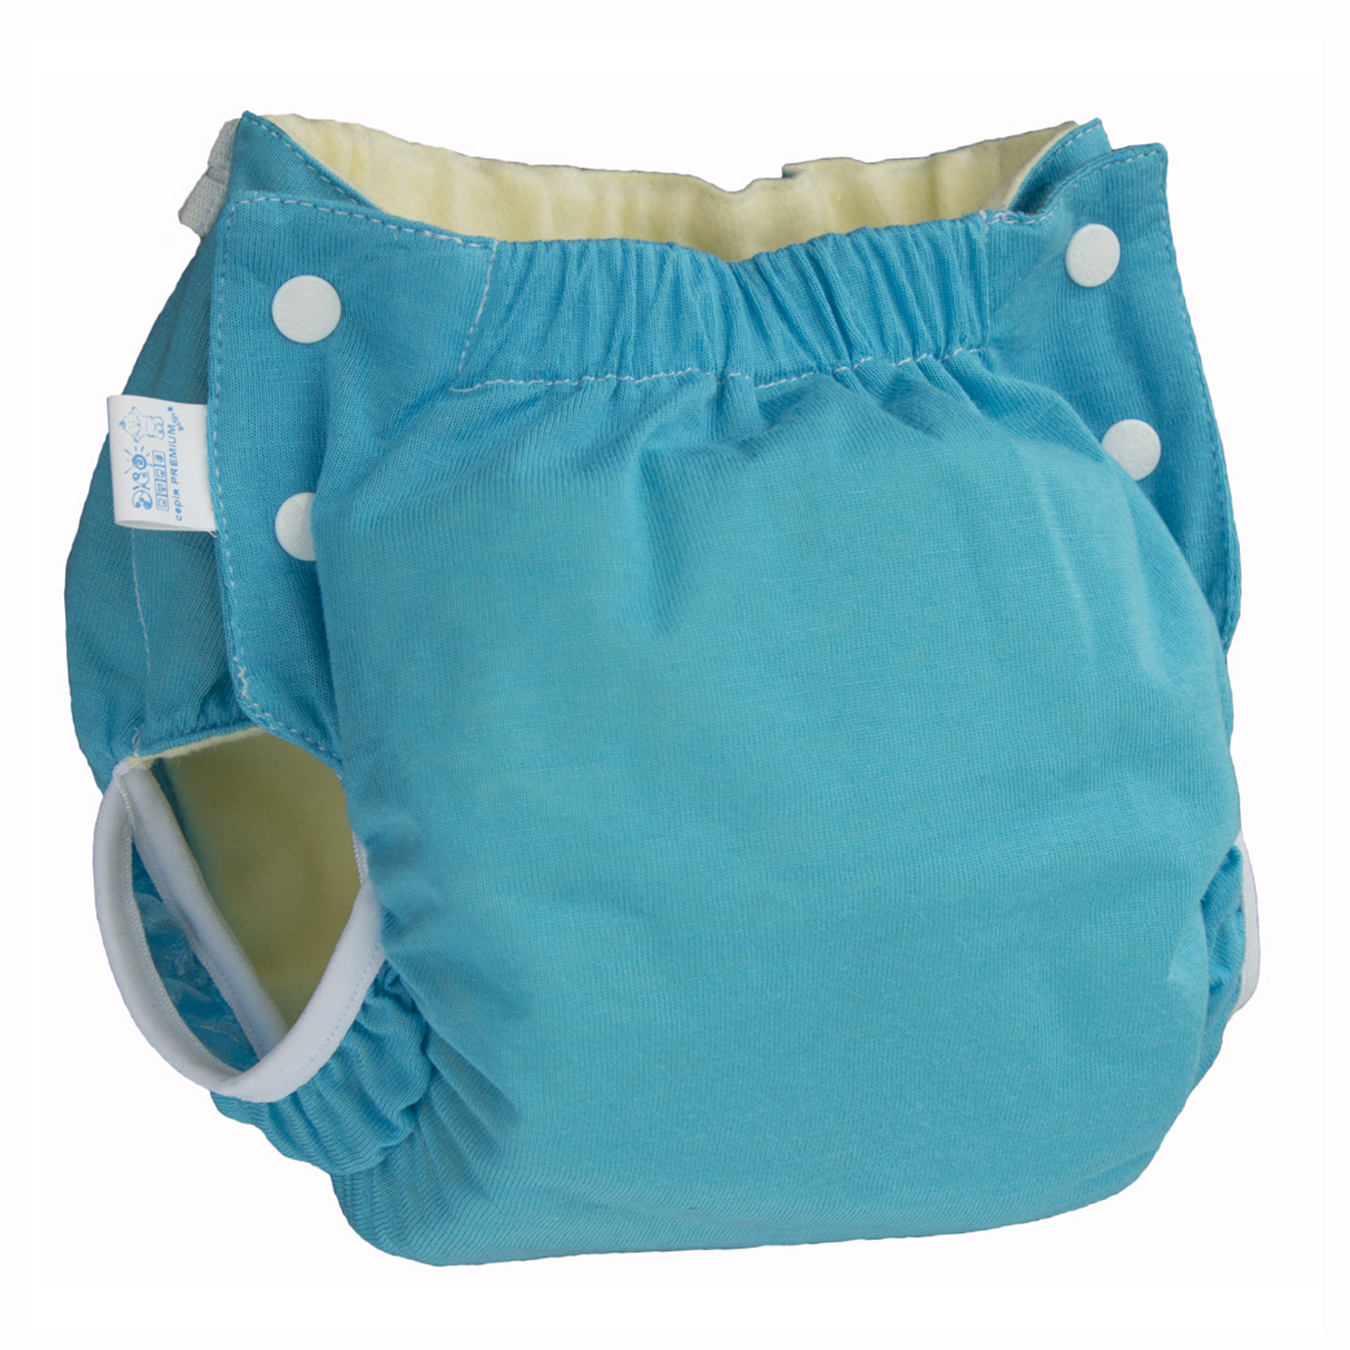 Diaper Abso Maxi turquoise Eco Pups Active Premium knitted 12-17 kg